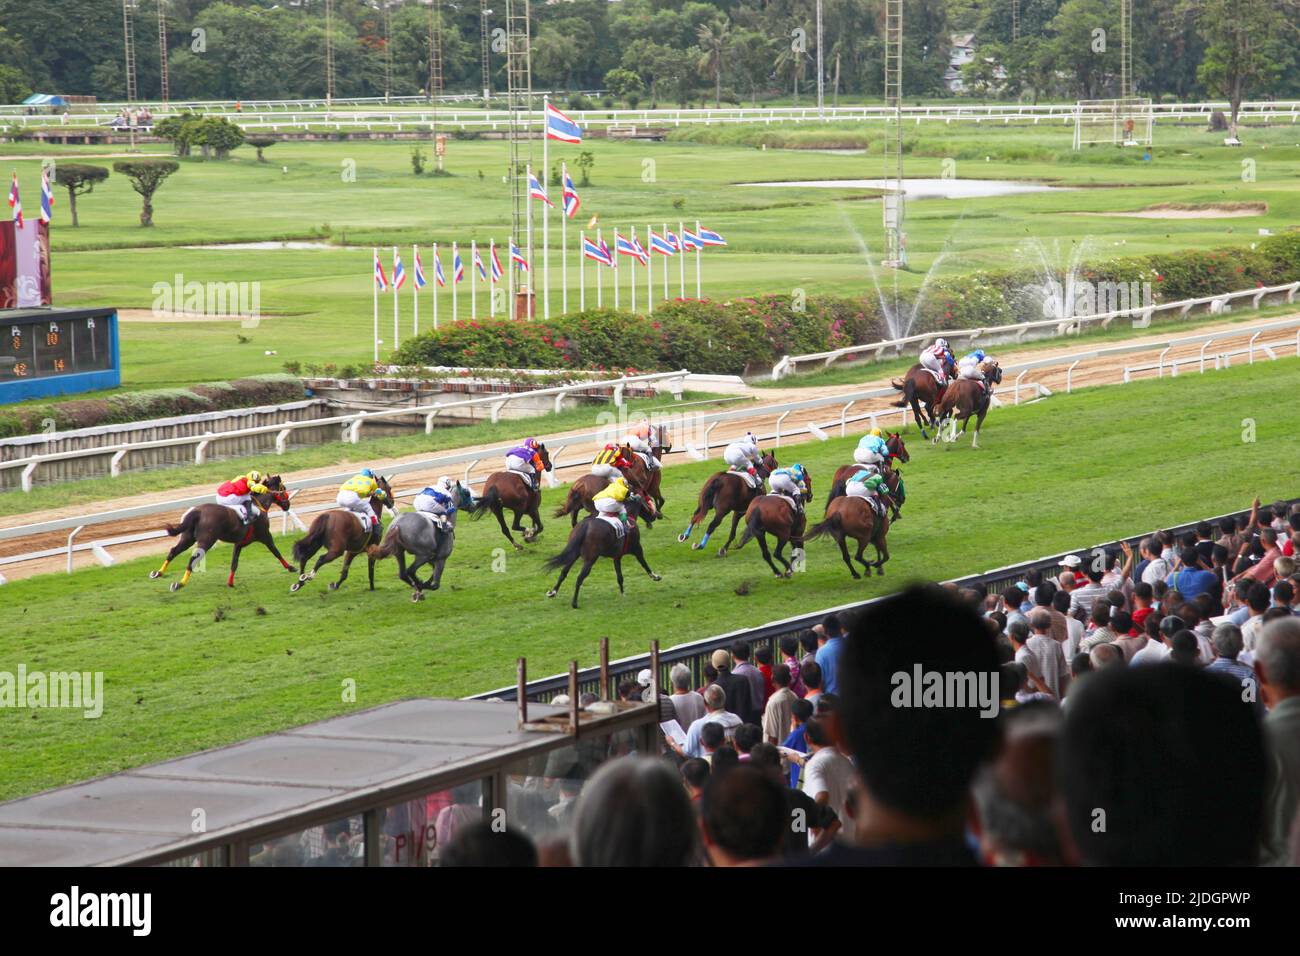 Bangkok, Thailand - July 29 2012: Horse racing at the Royal Bangkok Sports Club (RBSC), an exclusive sports club founded in 1901. Stock Photo